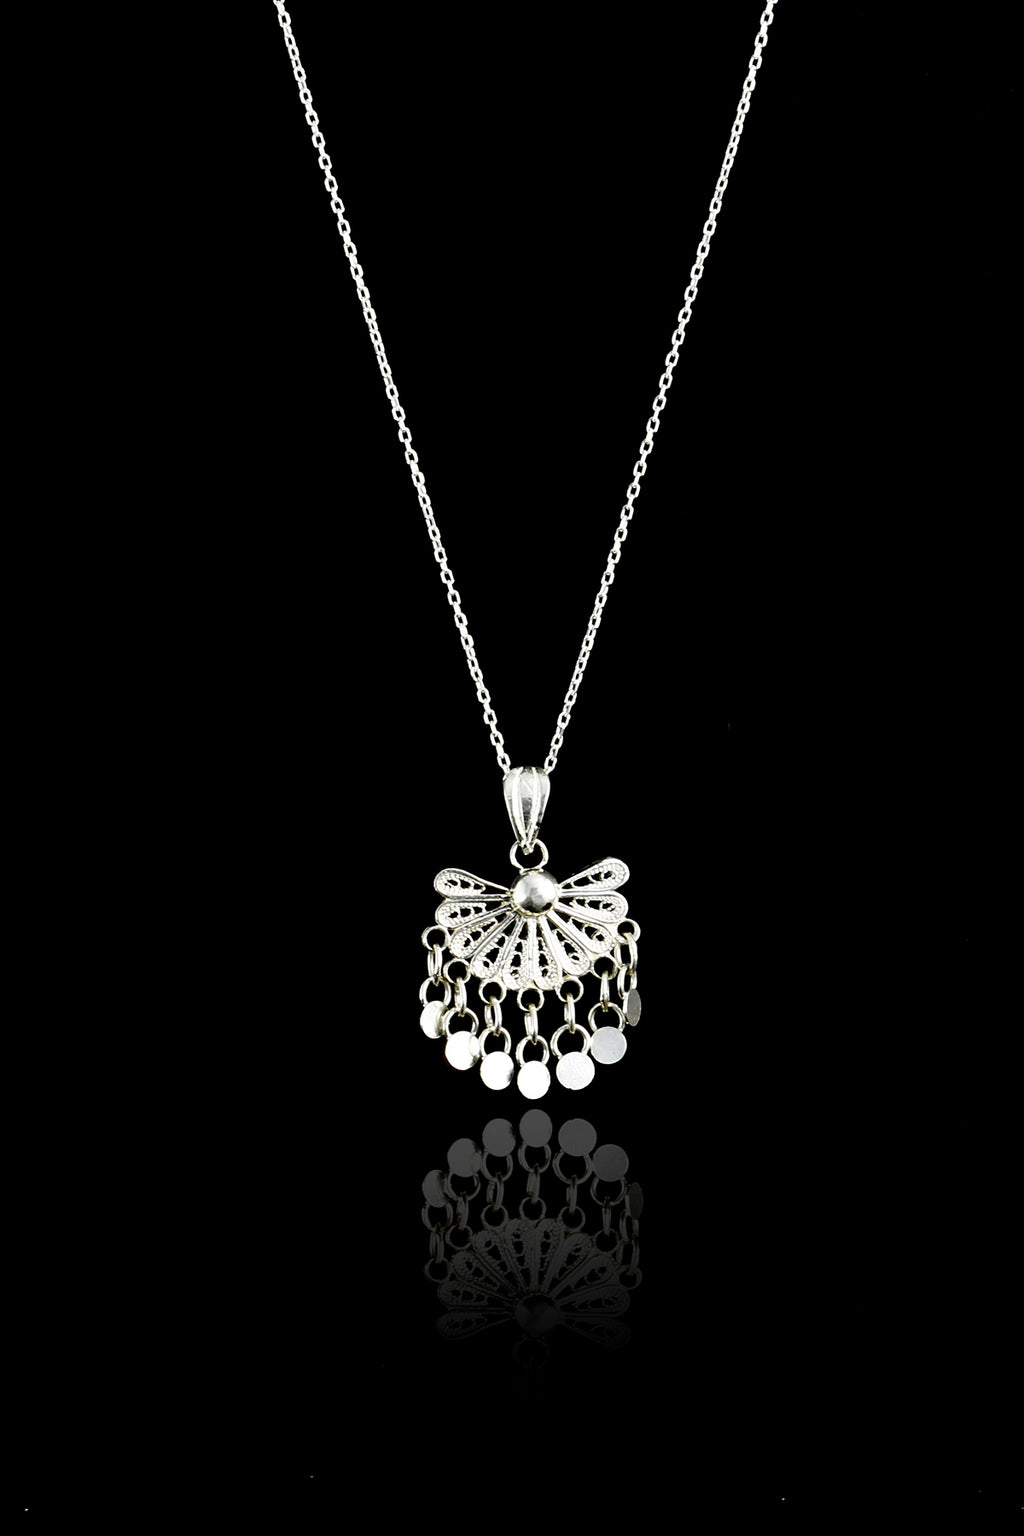 Fancy Handmade Filigree Sterling Silver Necklace (NG201017524)